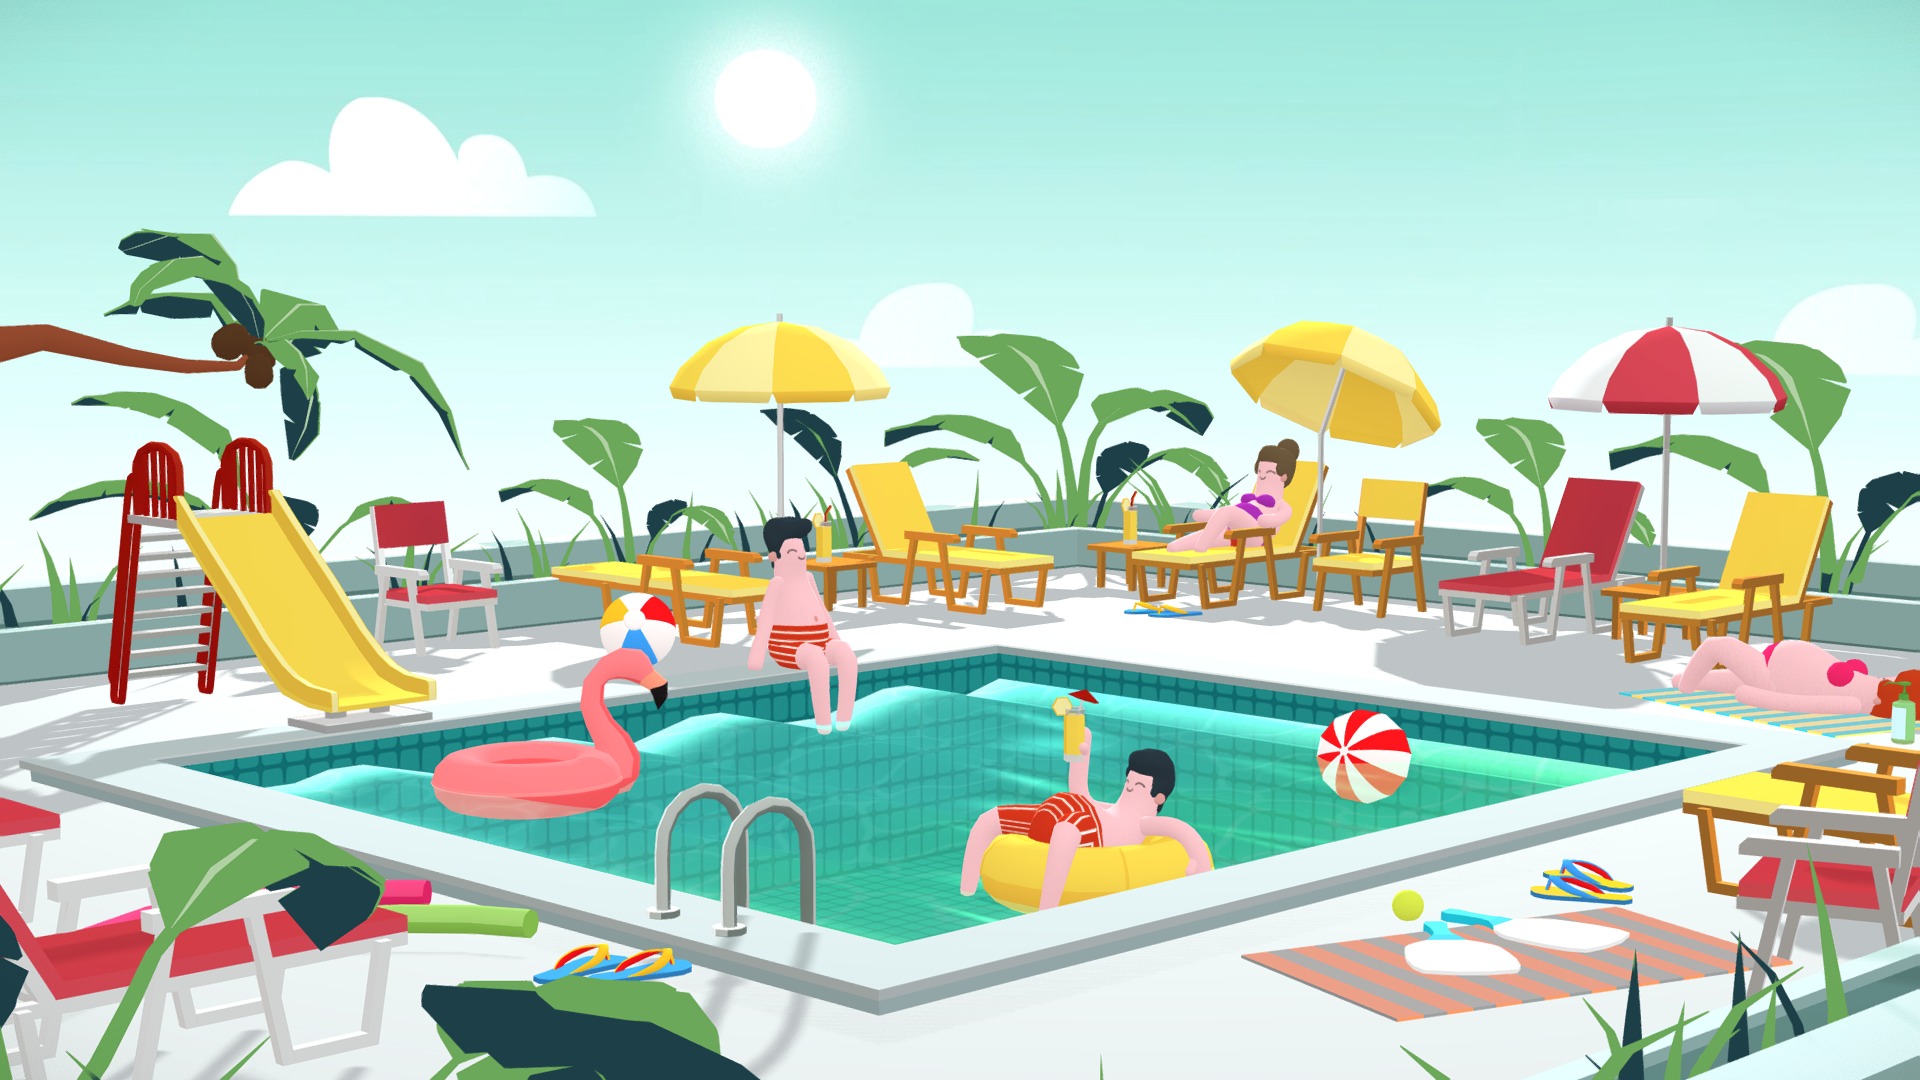 3D model LOWPOLY BEACH POOL SUMMER SYLIZED ASSETS CARTOON - This is a 3D model of the LOWPOLY BEACH POOL SUMMER SYLIZED ASSETS CARTOON. The 3D model is about a cartoon of a pool with people playing in it.